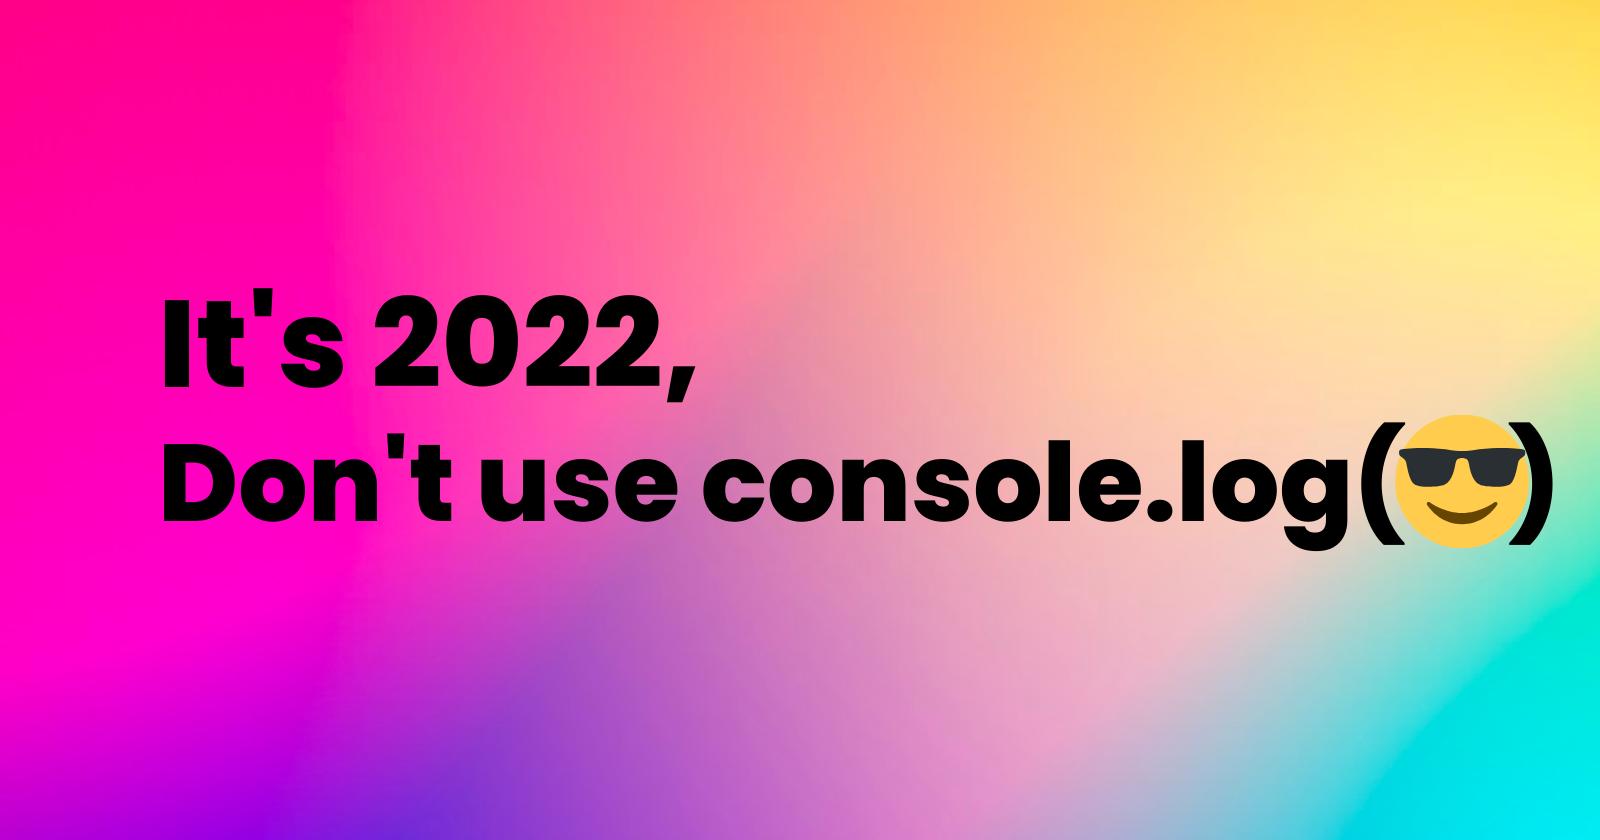 It's 2022, don't use the console.log(😎)